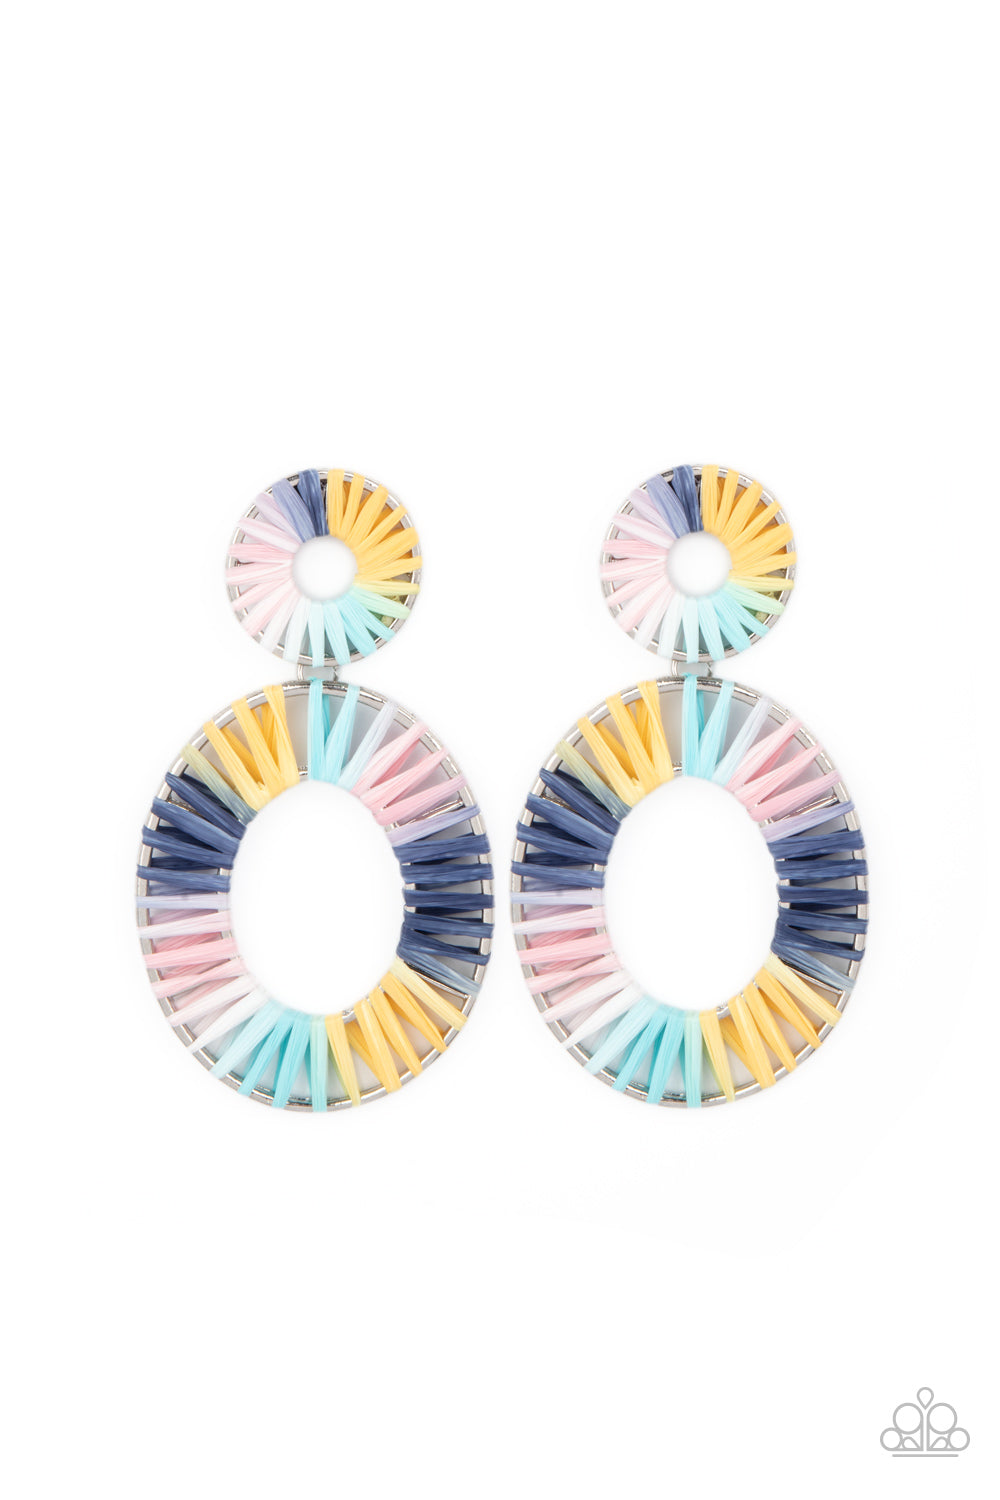 &lt;P&gt; Tie dyed wicker-like accents wrap around an oversized silver oval and dainty circular frame, linking into a colorful lure. Earring attaches to a standard post fitting.
&lt;/P&gt;  

&lt;P&gt; &lt;I&gt;  Sold as one pair of post earrings. &lt;/I&gt;  &lt;/P&gt;


&lt;img src=\&quot;https://d9b54x484lq62.cloudfront.net/paparazzi/shopping/images/517_tag150x115_1.png\&quot; alt=\&quot;New Kit\&quot; align=\&quot;middle\&quot; height=\&quot;50\&quot; width=\&quot;50\&quot;/&gt;